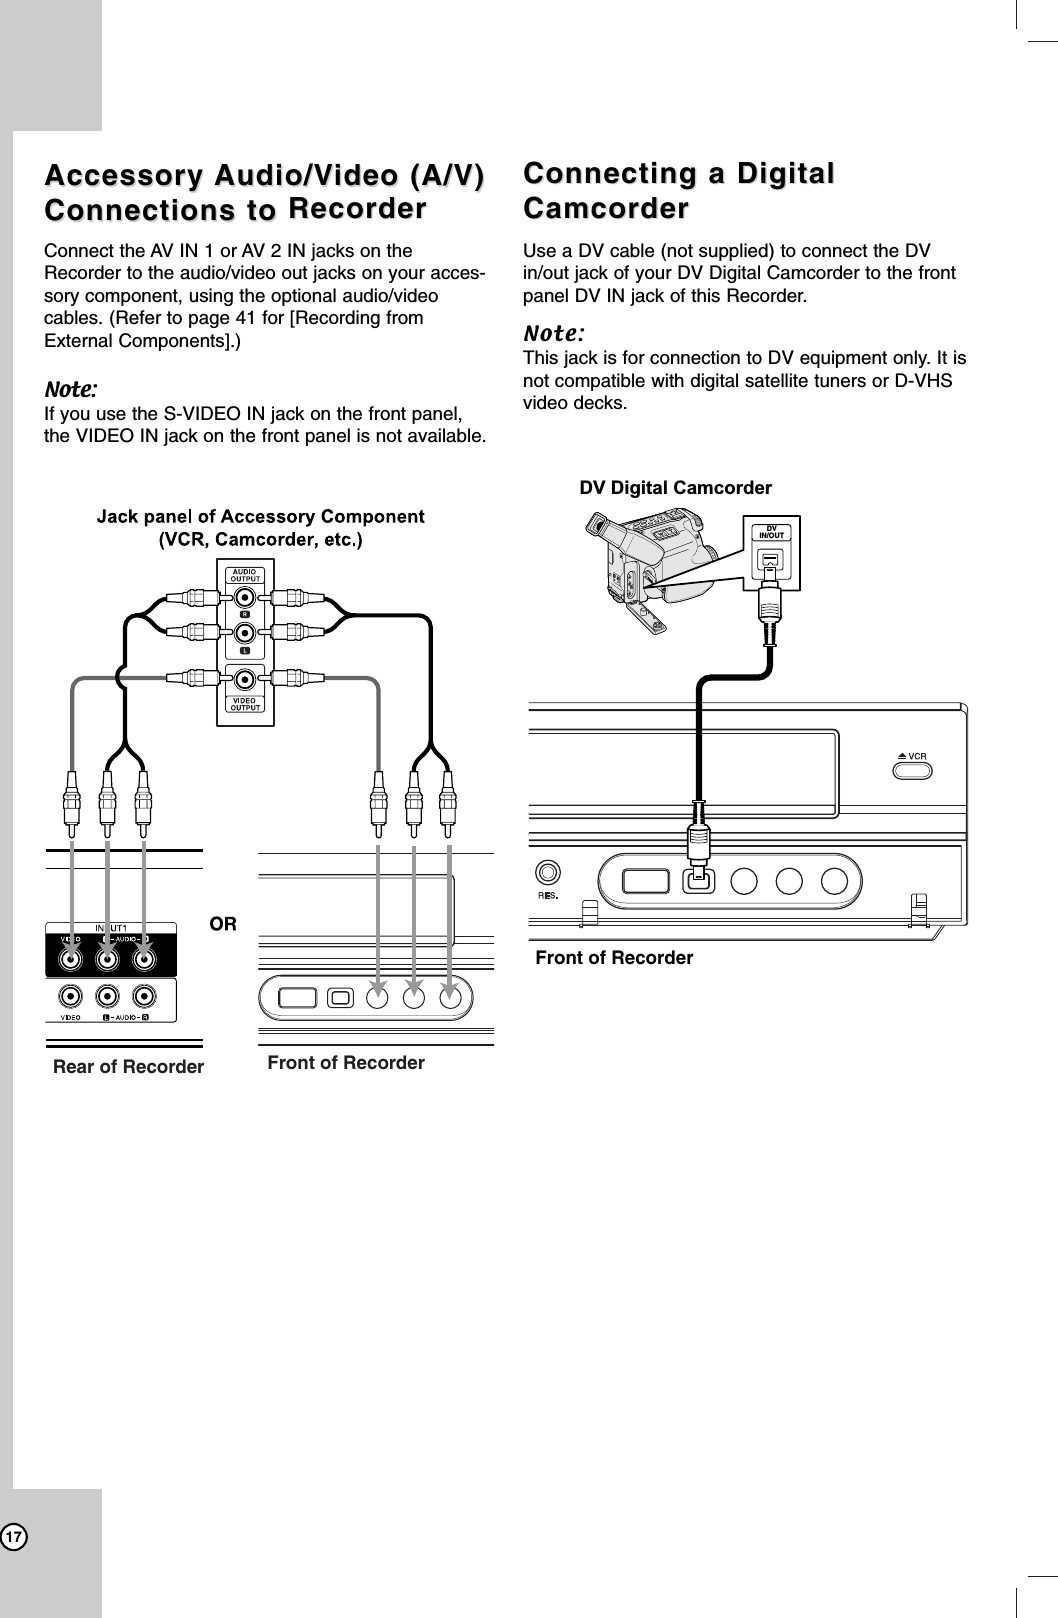 17Accessory Accessory Audio/VAudio/Video (A/V)ideo (A/V)Connections to Connections to RecorderRecorderConnect the AV IN 1 or AV 2 IN jacks on theRecorder to the audio/video out jacks on your acces-sory component, using the optional audio/videocables. (Refer to page 41 for [Recording fromExternal Components].)Note: If you use the S-VIDEO IN jack on the front panel,the VIDEO IN jack on the front panel is not available.Connecting a DigitalConnecting a DigitalCamcorderCamcorderUse a DV cable (not supplied) to connect the DVin/out jack of your DV Digital Camcorder to the frontpanel DV IN jack of this Recorder.Note:This jack is for connection to DV equipment only. It isnot compatible with digital satellite tuners or D-VHSvideo decks.Rear of Recorder Front of RecorderDV Digital CamcorderFront of RecorderDVIN/OUT